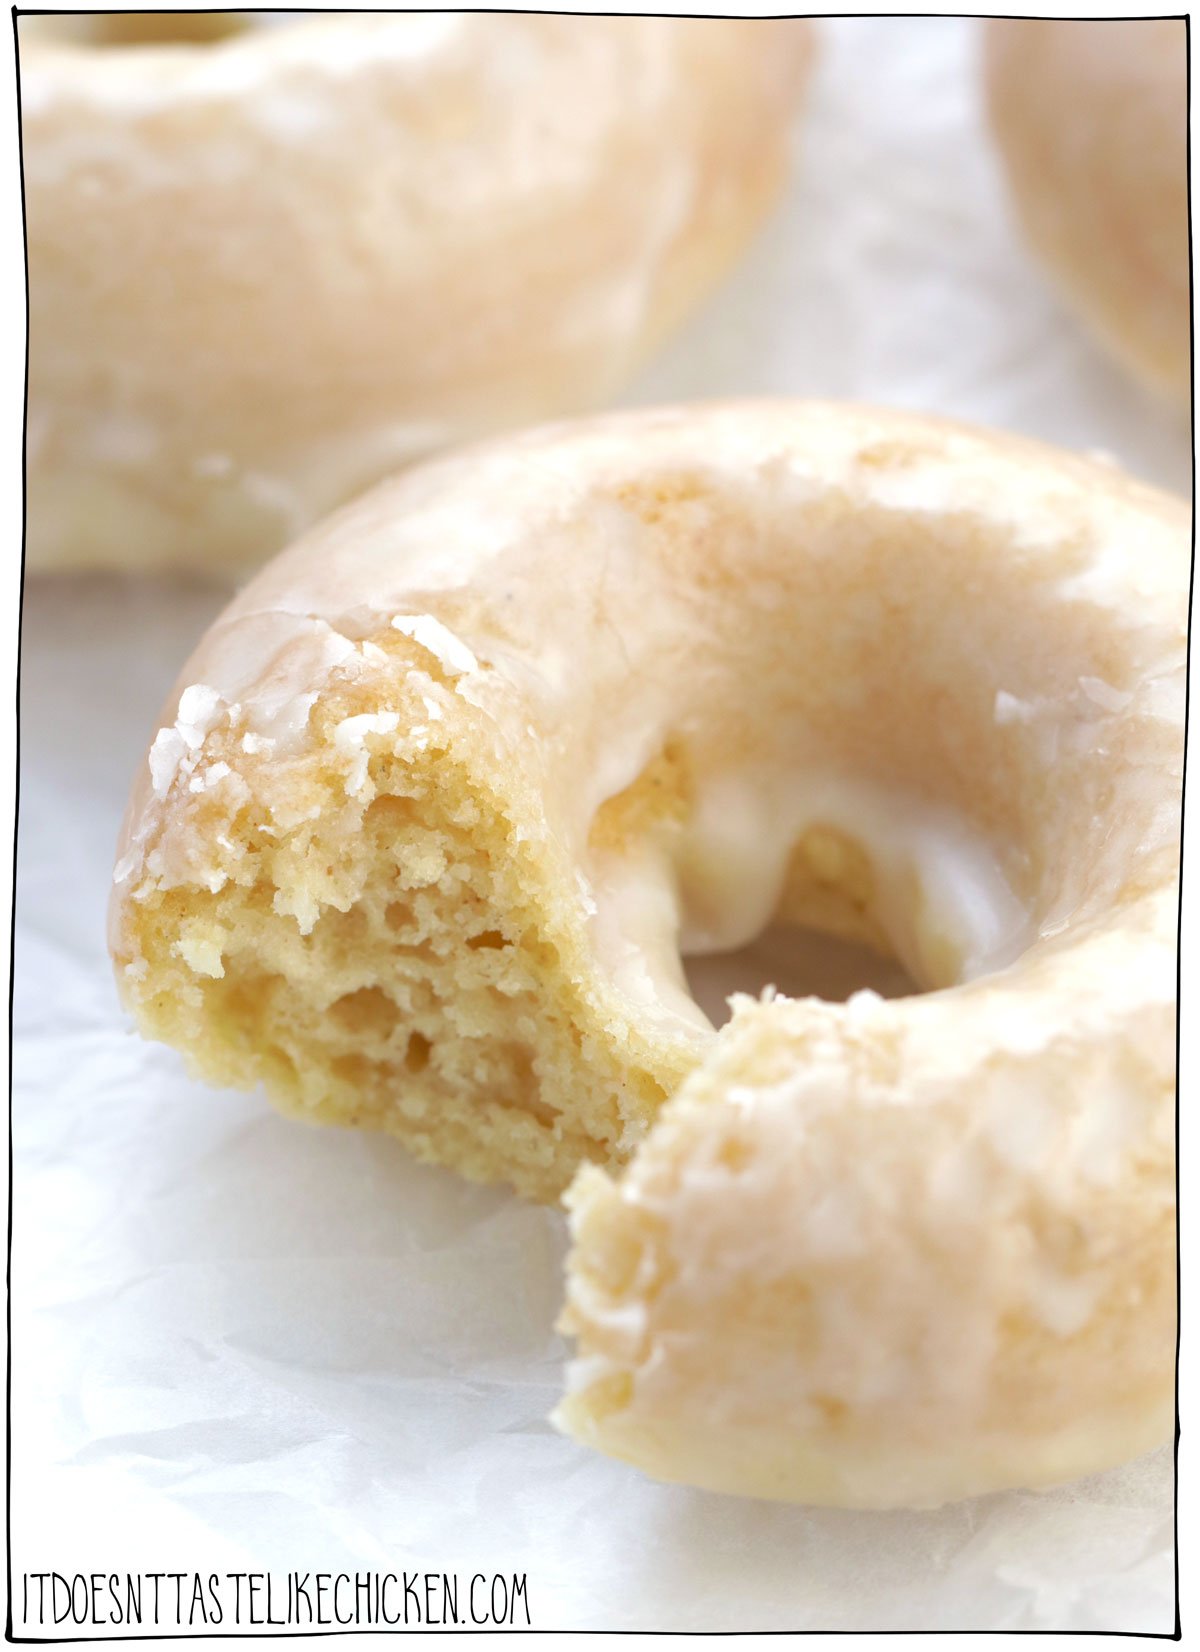 So fluffy and light yet decadent and sweet, Easy Vegan Glazed Donuts are just 10 ingredients and take less than 30 minutes to make. These sugary flavour bombs are an explosion of sweet, melt in your mouth deliciousness with every bite that will have you reaching for another one before you're done your first! 